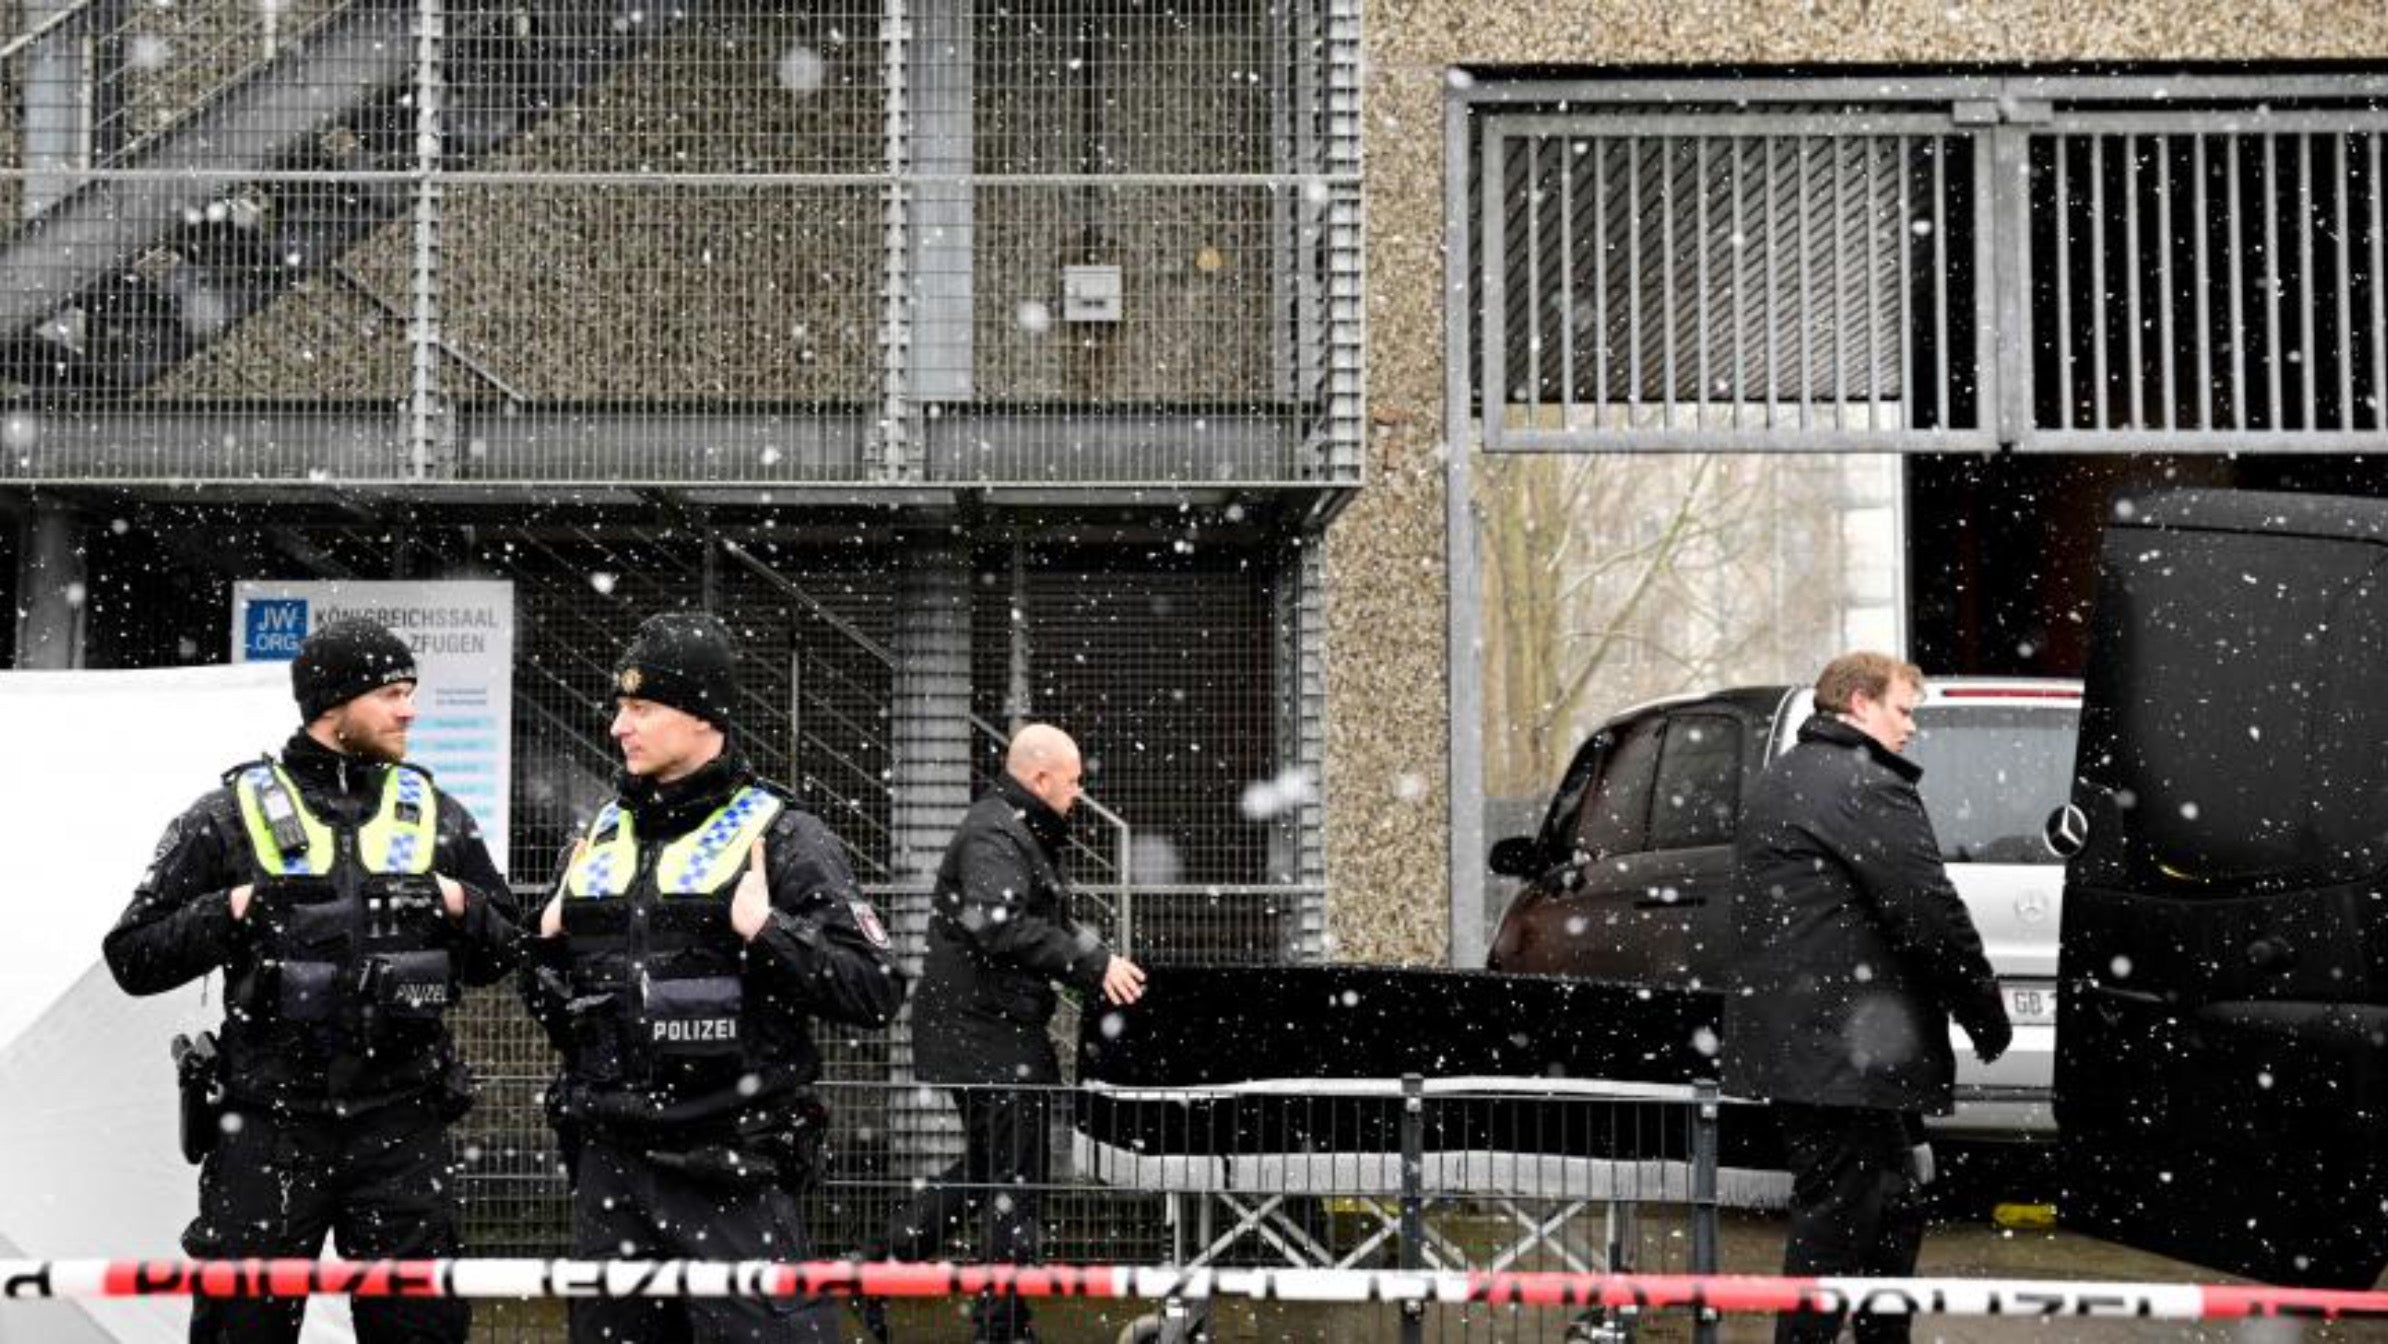 Shooting kills 8 including a pregnant woman at a Jehovah’s Witness center in Germany, shooter committed suicide, Magnate Daily